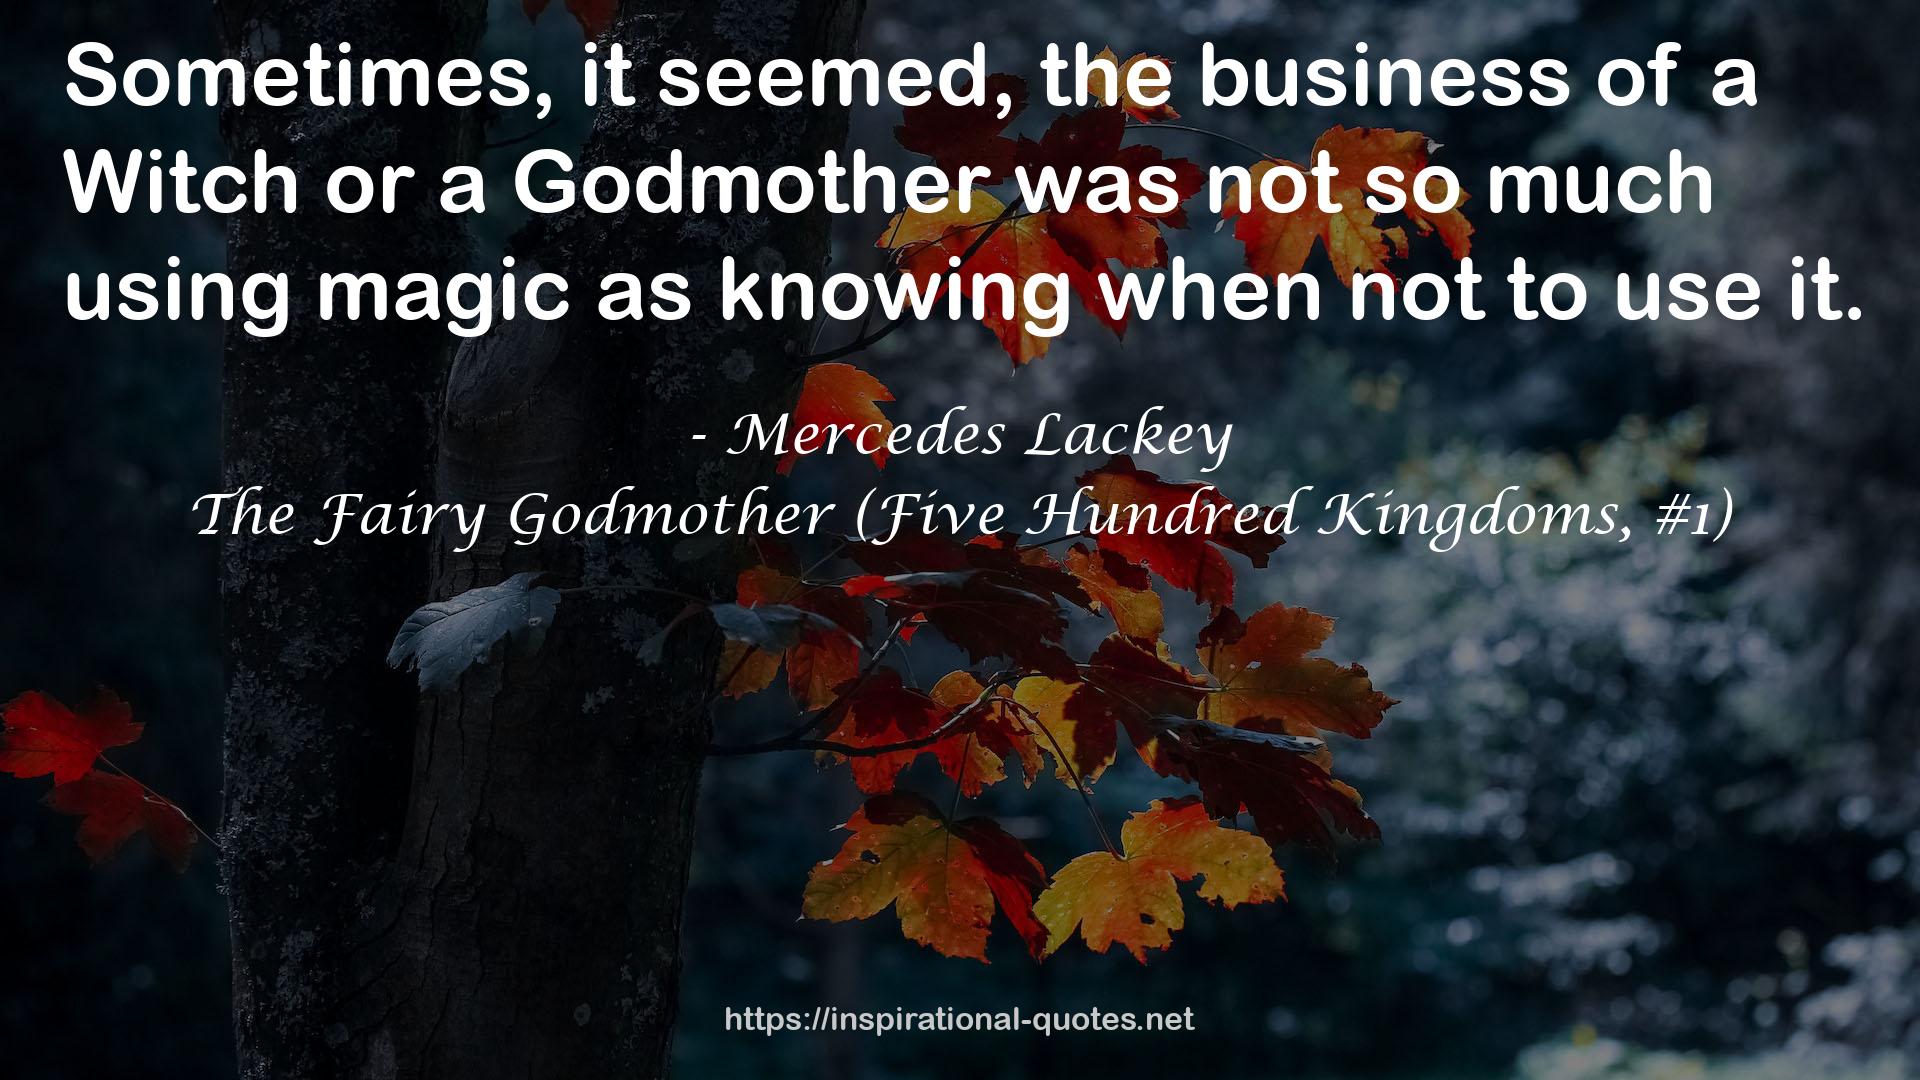 The Fairy Godmother (Five Hundred Kingdoms, #1) QUOTES